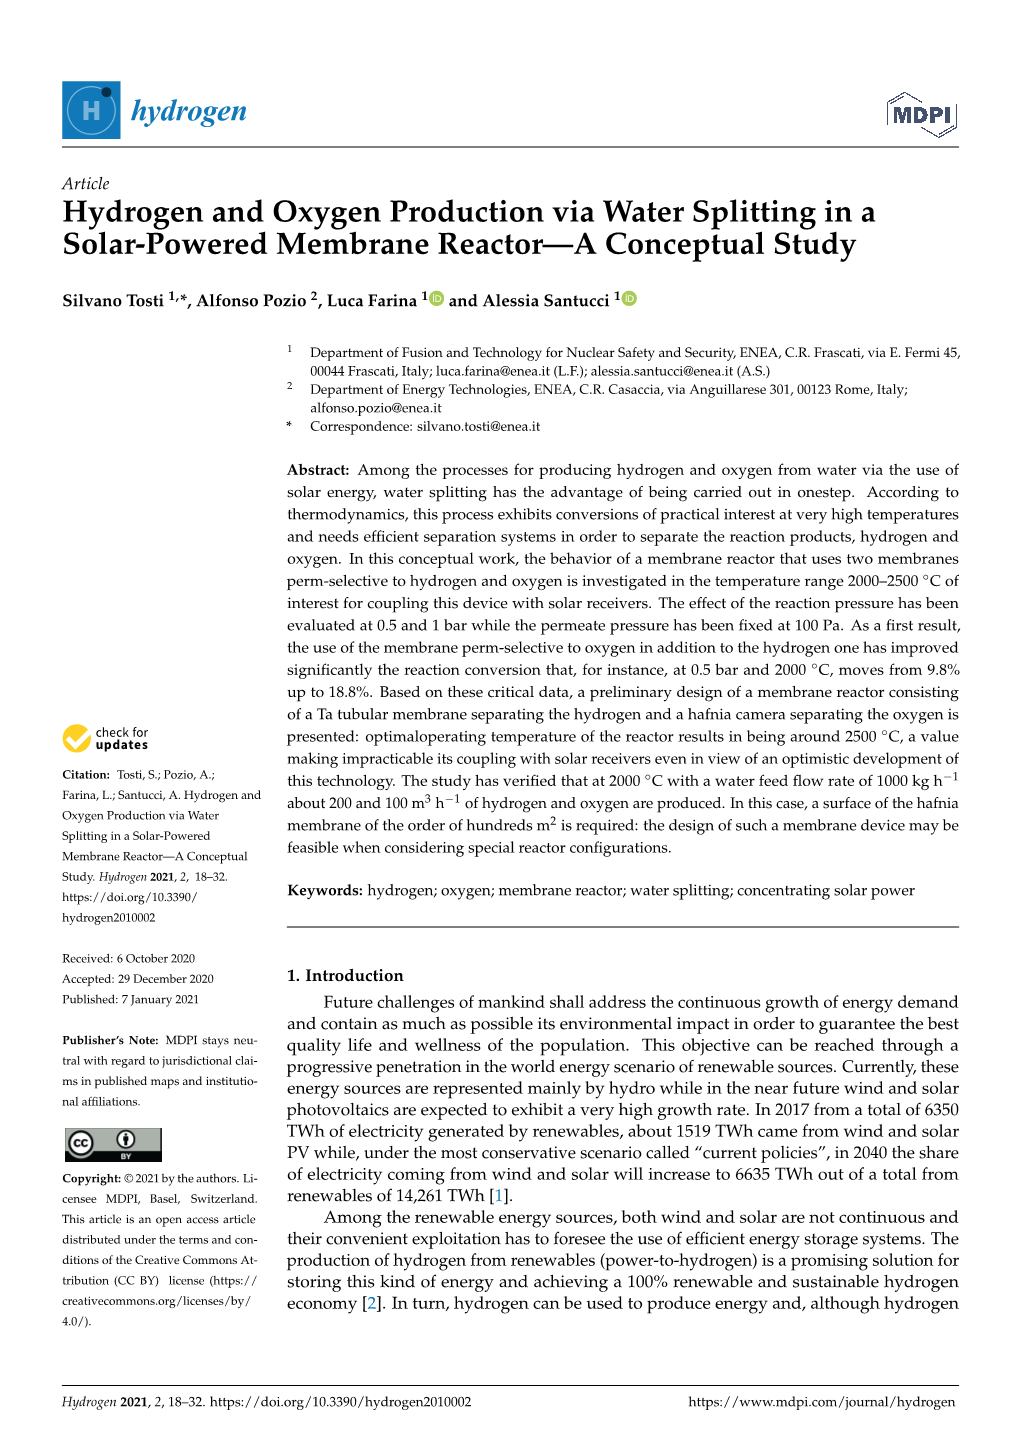 Hydrogen and Oxygen Production Via Water Splitting in a Solar-Powered Membrane Reactor—A Conceptual Study